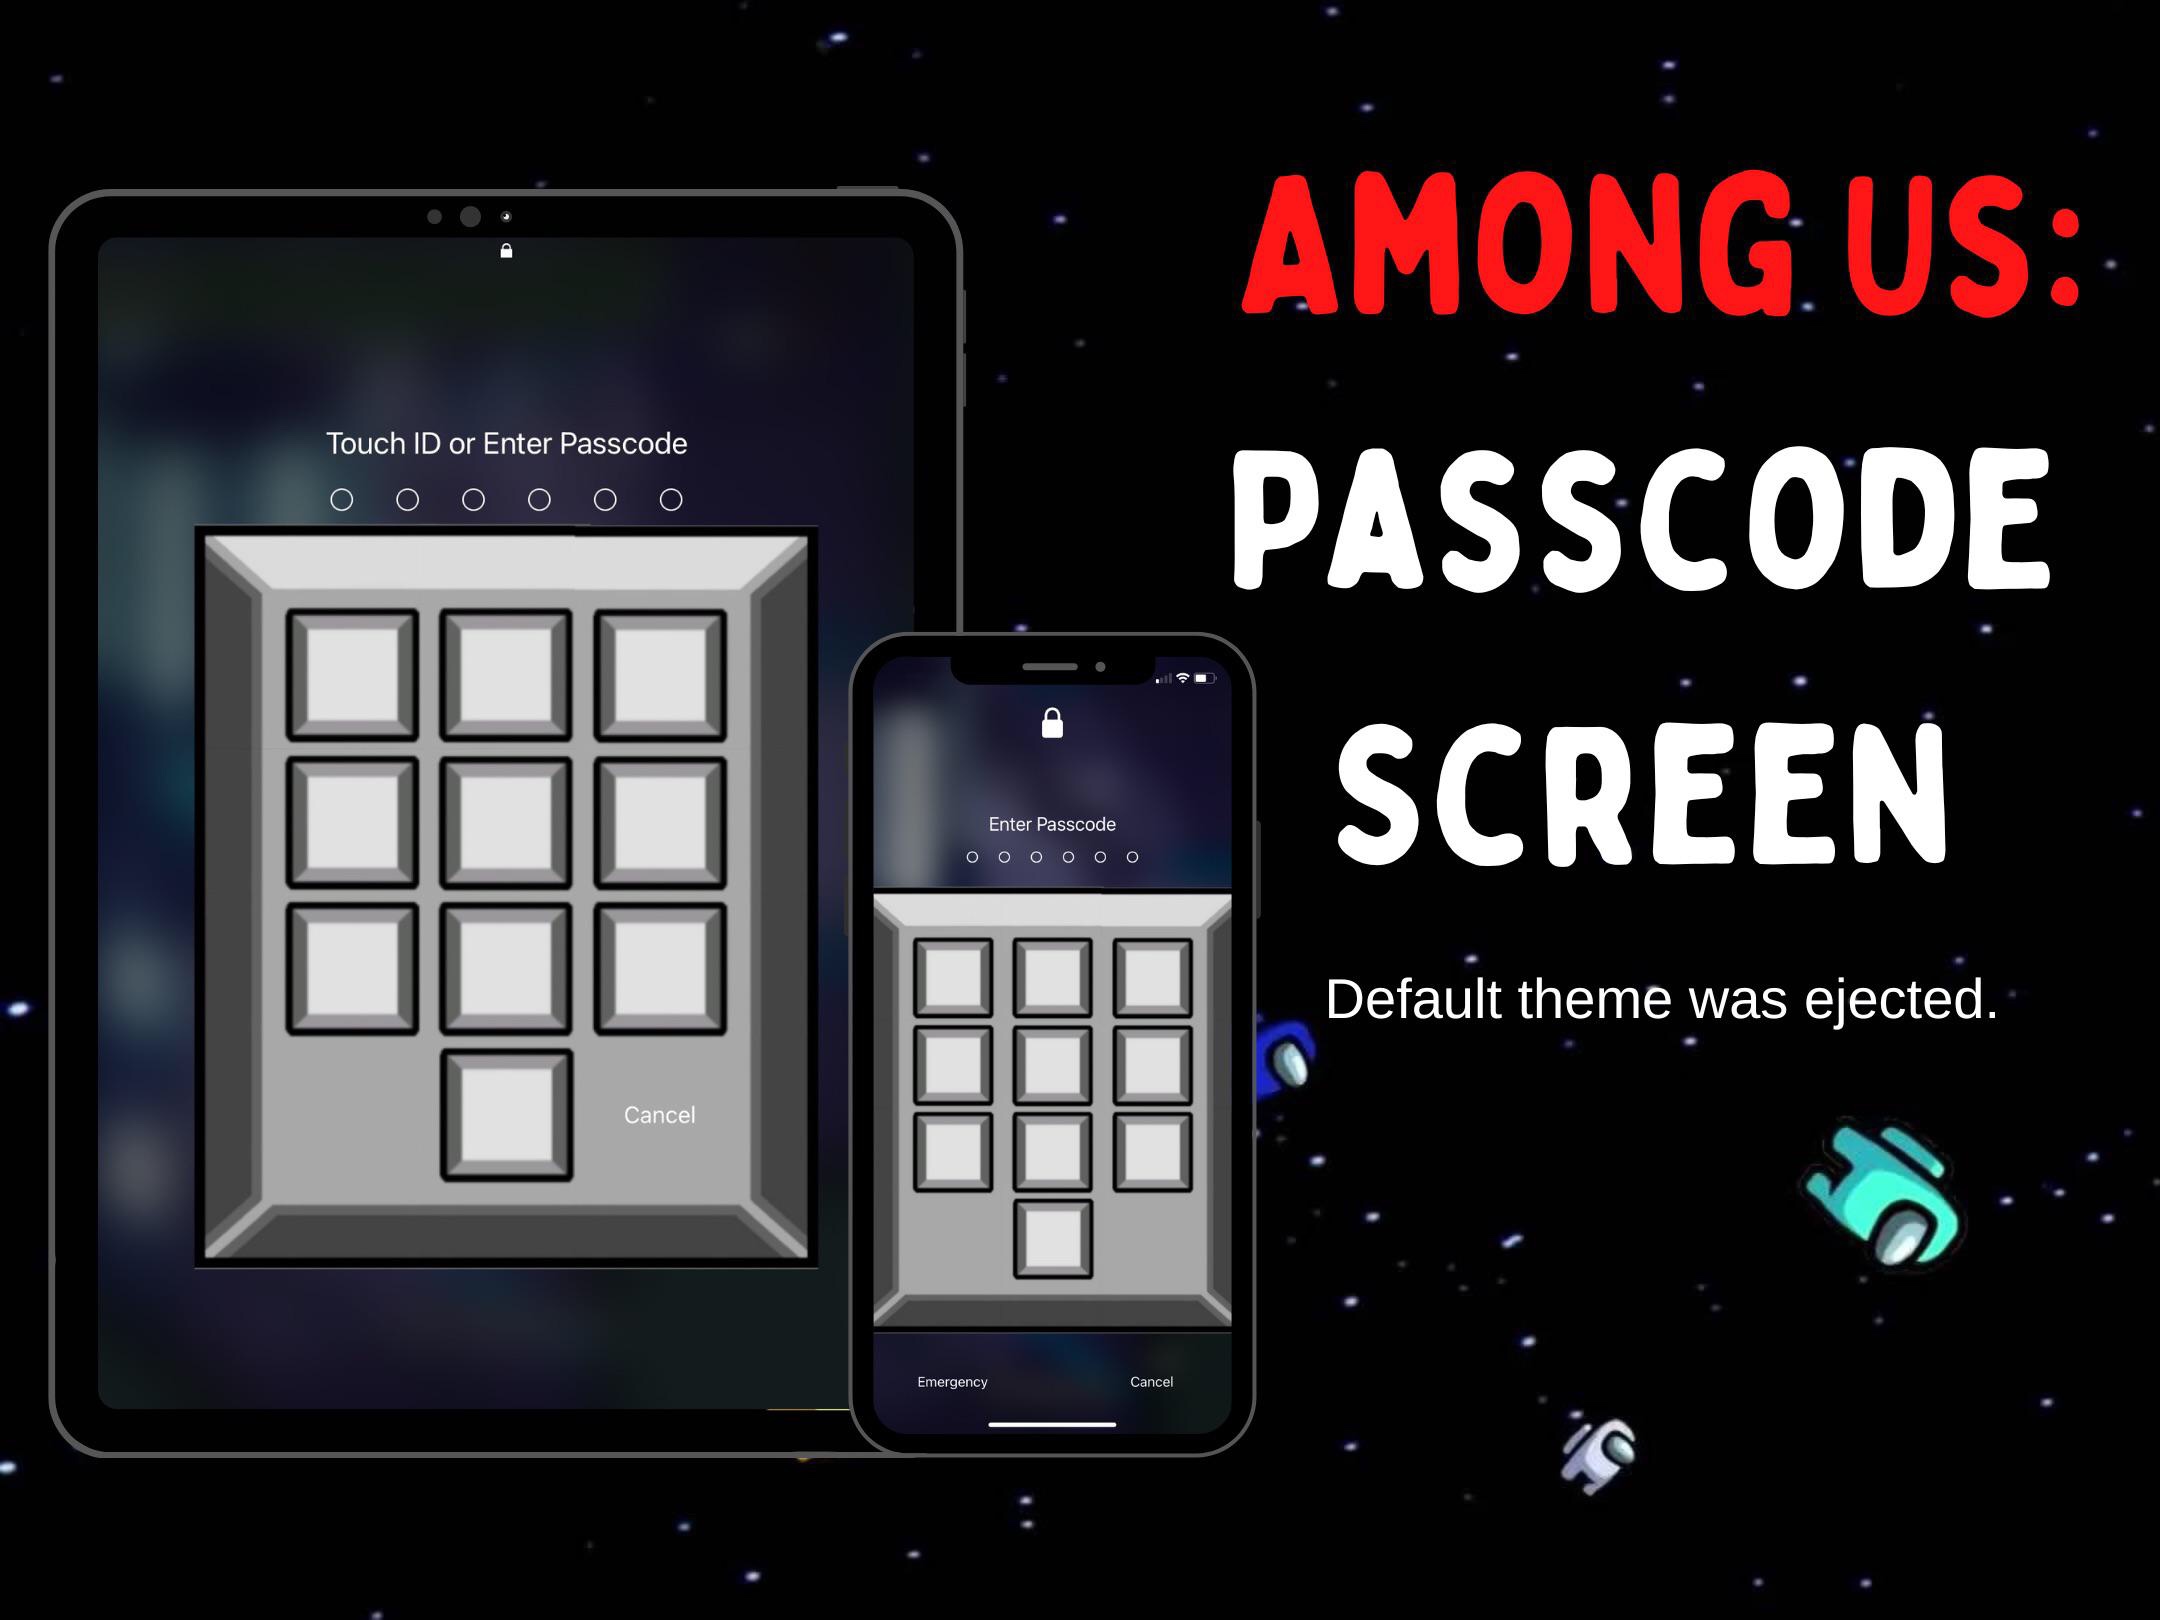 New Among Us passcode interface for TrollTools users looks sharp